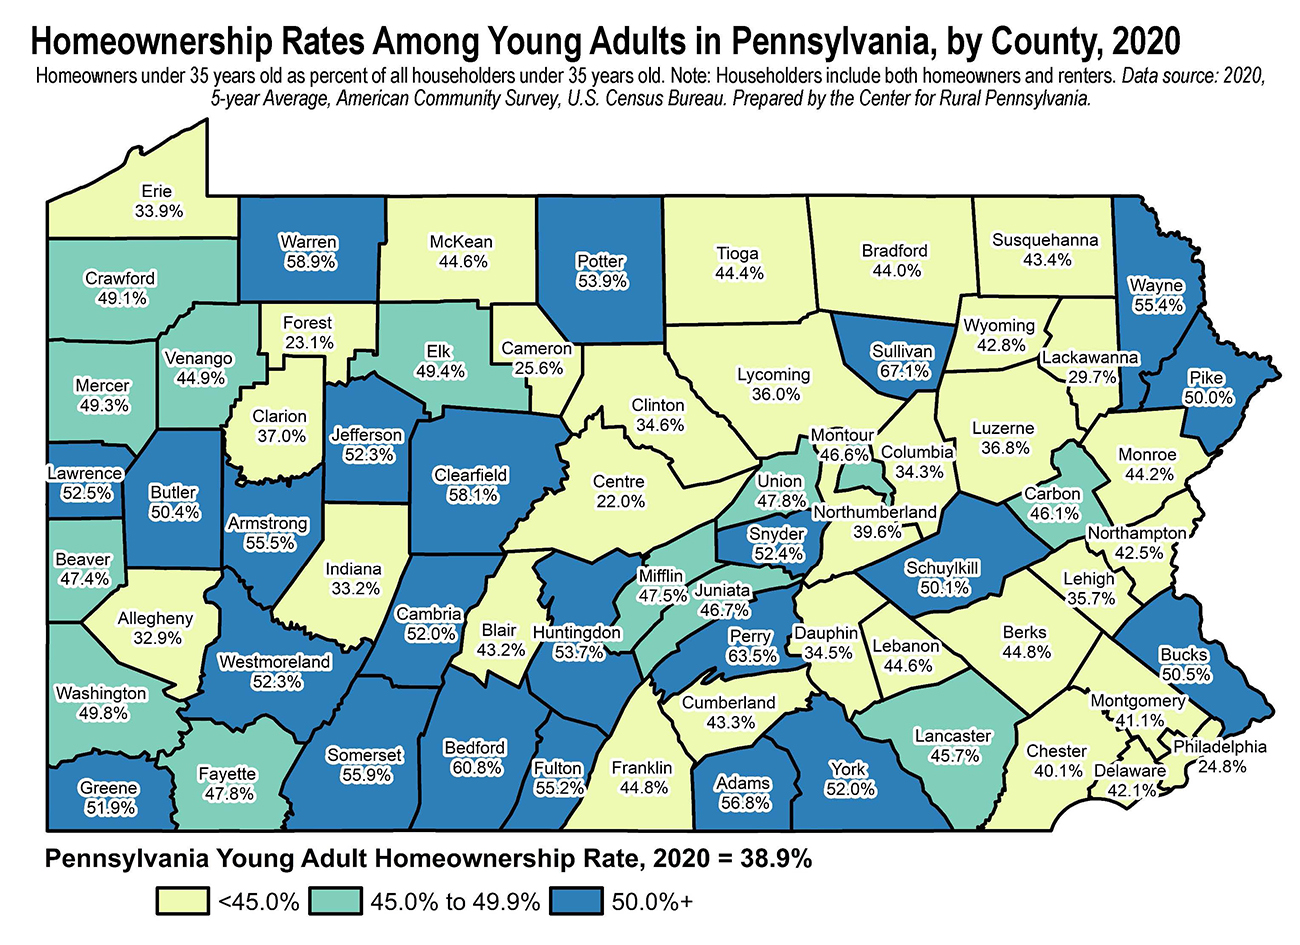 Map showing young adult homeownership rates in Pennsylvania counties for 2020